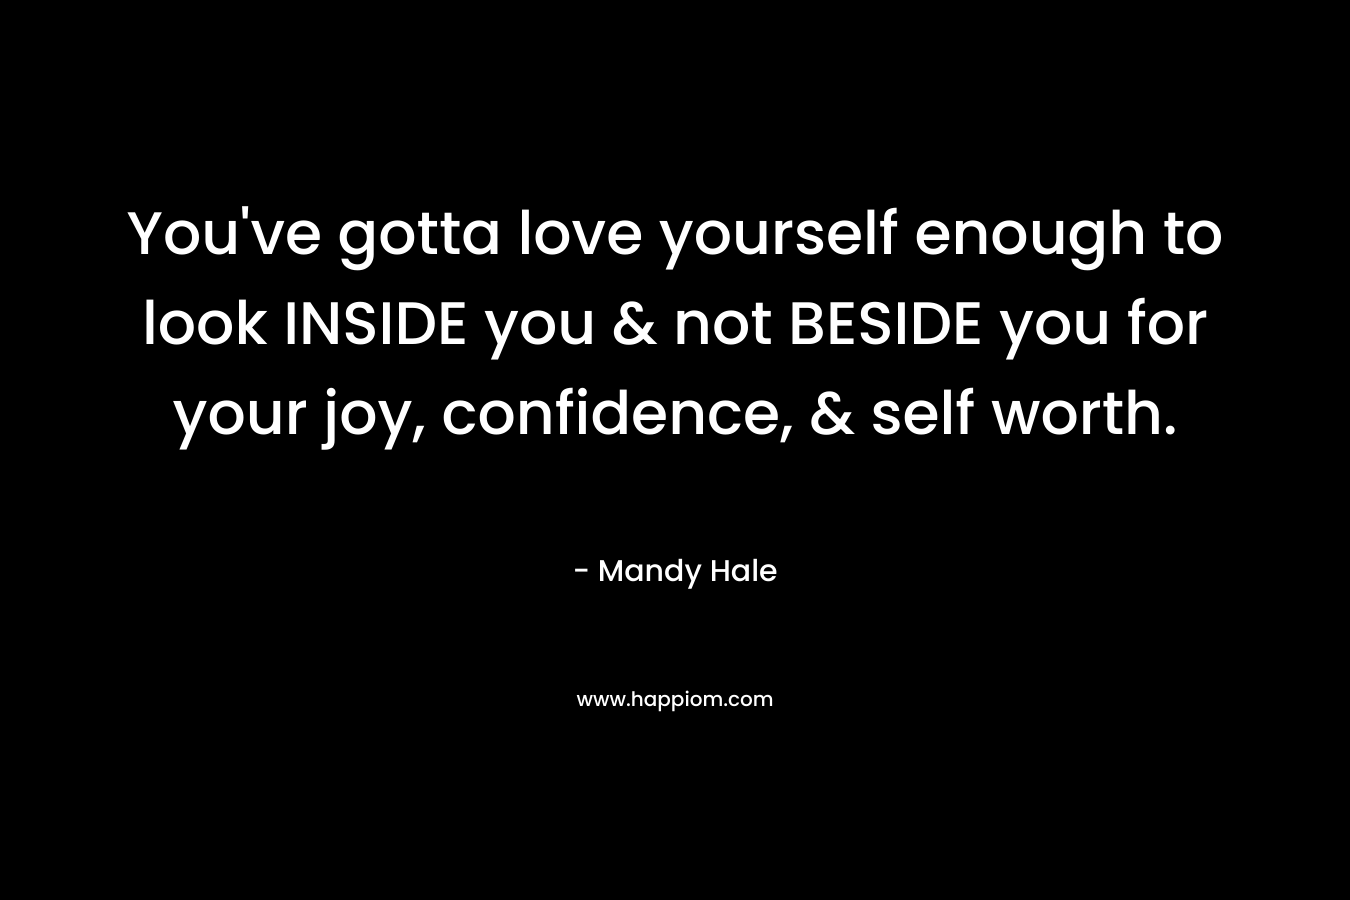 You've gotta love yourself enough to look INSIDE you & not BESIDE you for your joy, confidence, & self worth.